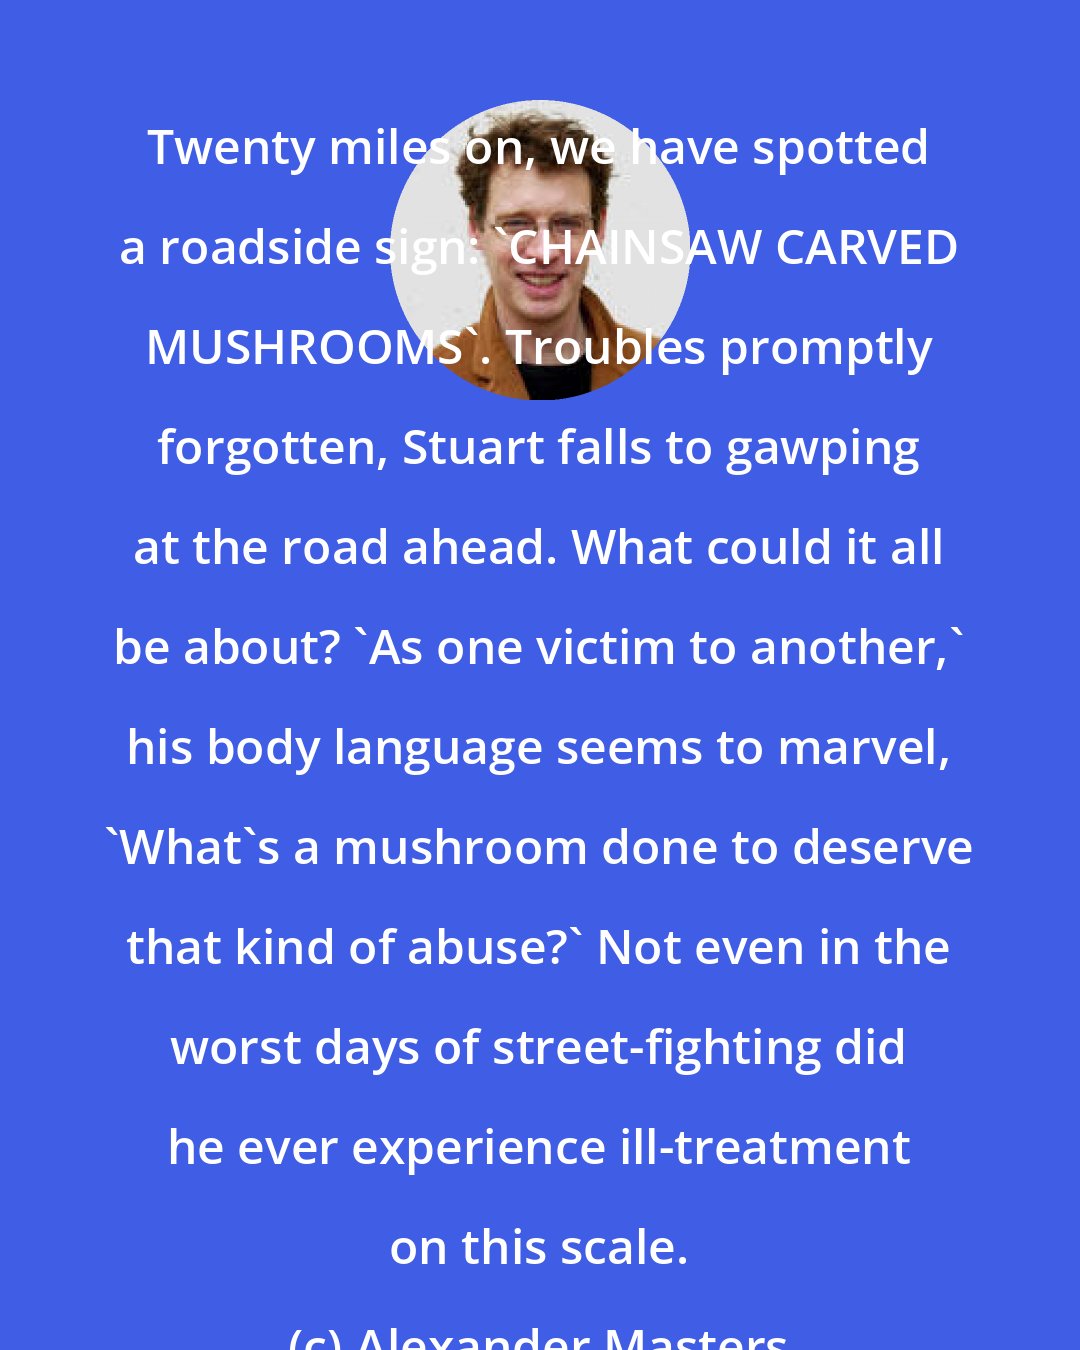 Alexander Masters: Twenty miles on, we have spotted a roadside sign: 'CHAINSAW CARVED MUSHROOMS'. Troubles promptly forgotten, Stuart falls to gawping at the road ahead. What could it all be about? 'As one victim to another,' his body language seems to marvel, 'What's a mushroom done to deserve that kind of abuse?' Not even in the worst days of street-fighting did he ever experience ill-treatment on this scale.